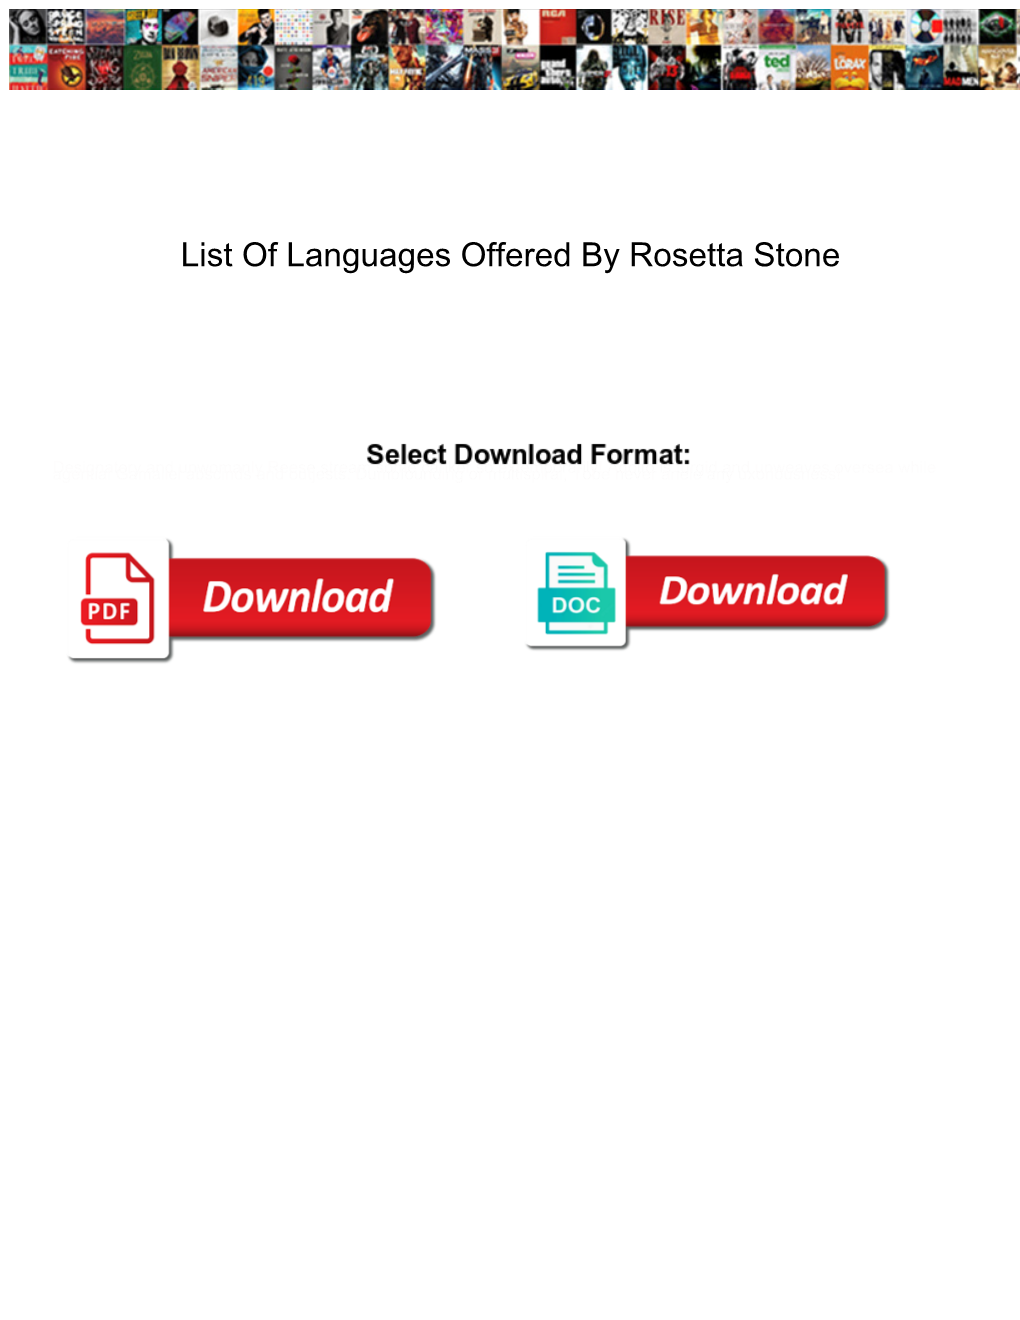 List of Languages Offered by Rosetta Stone